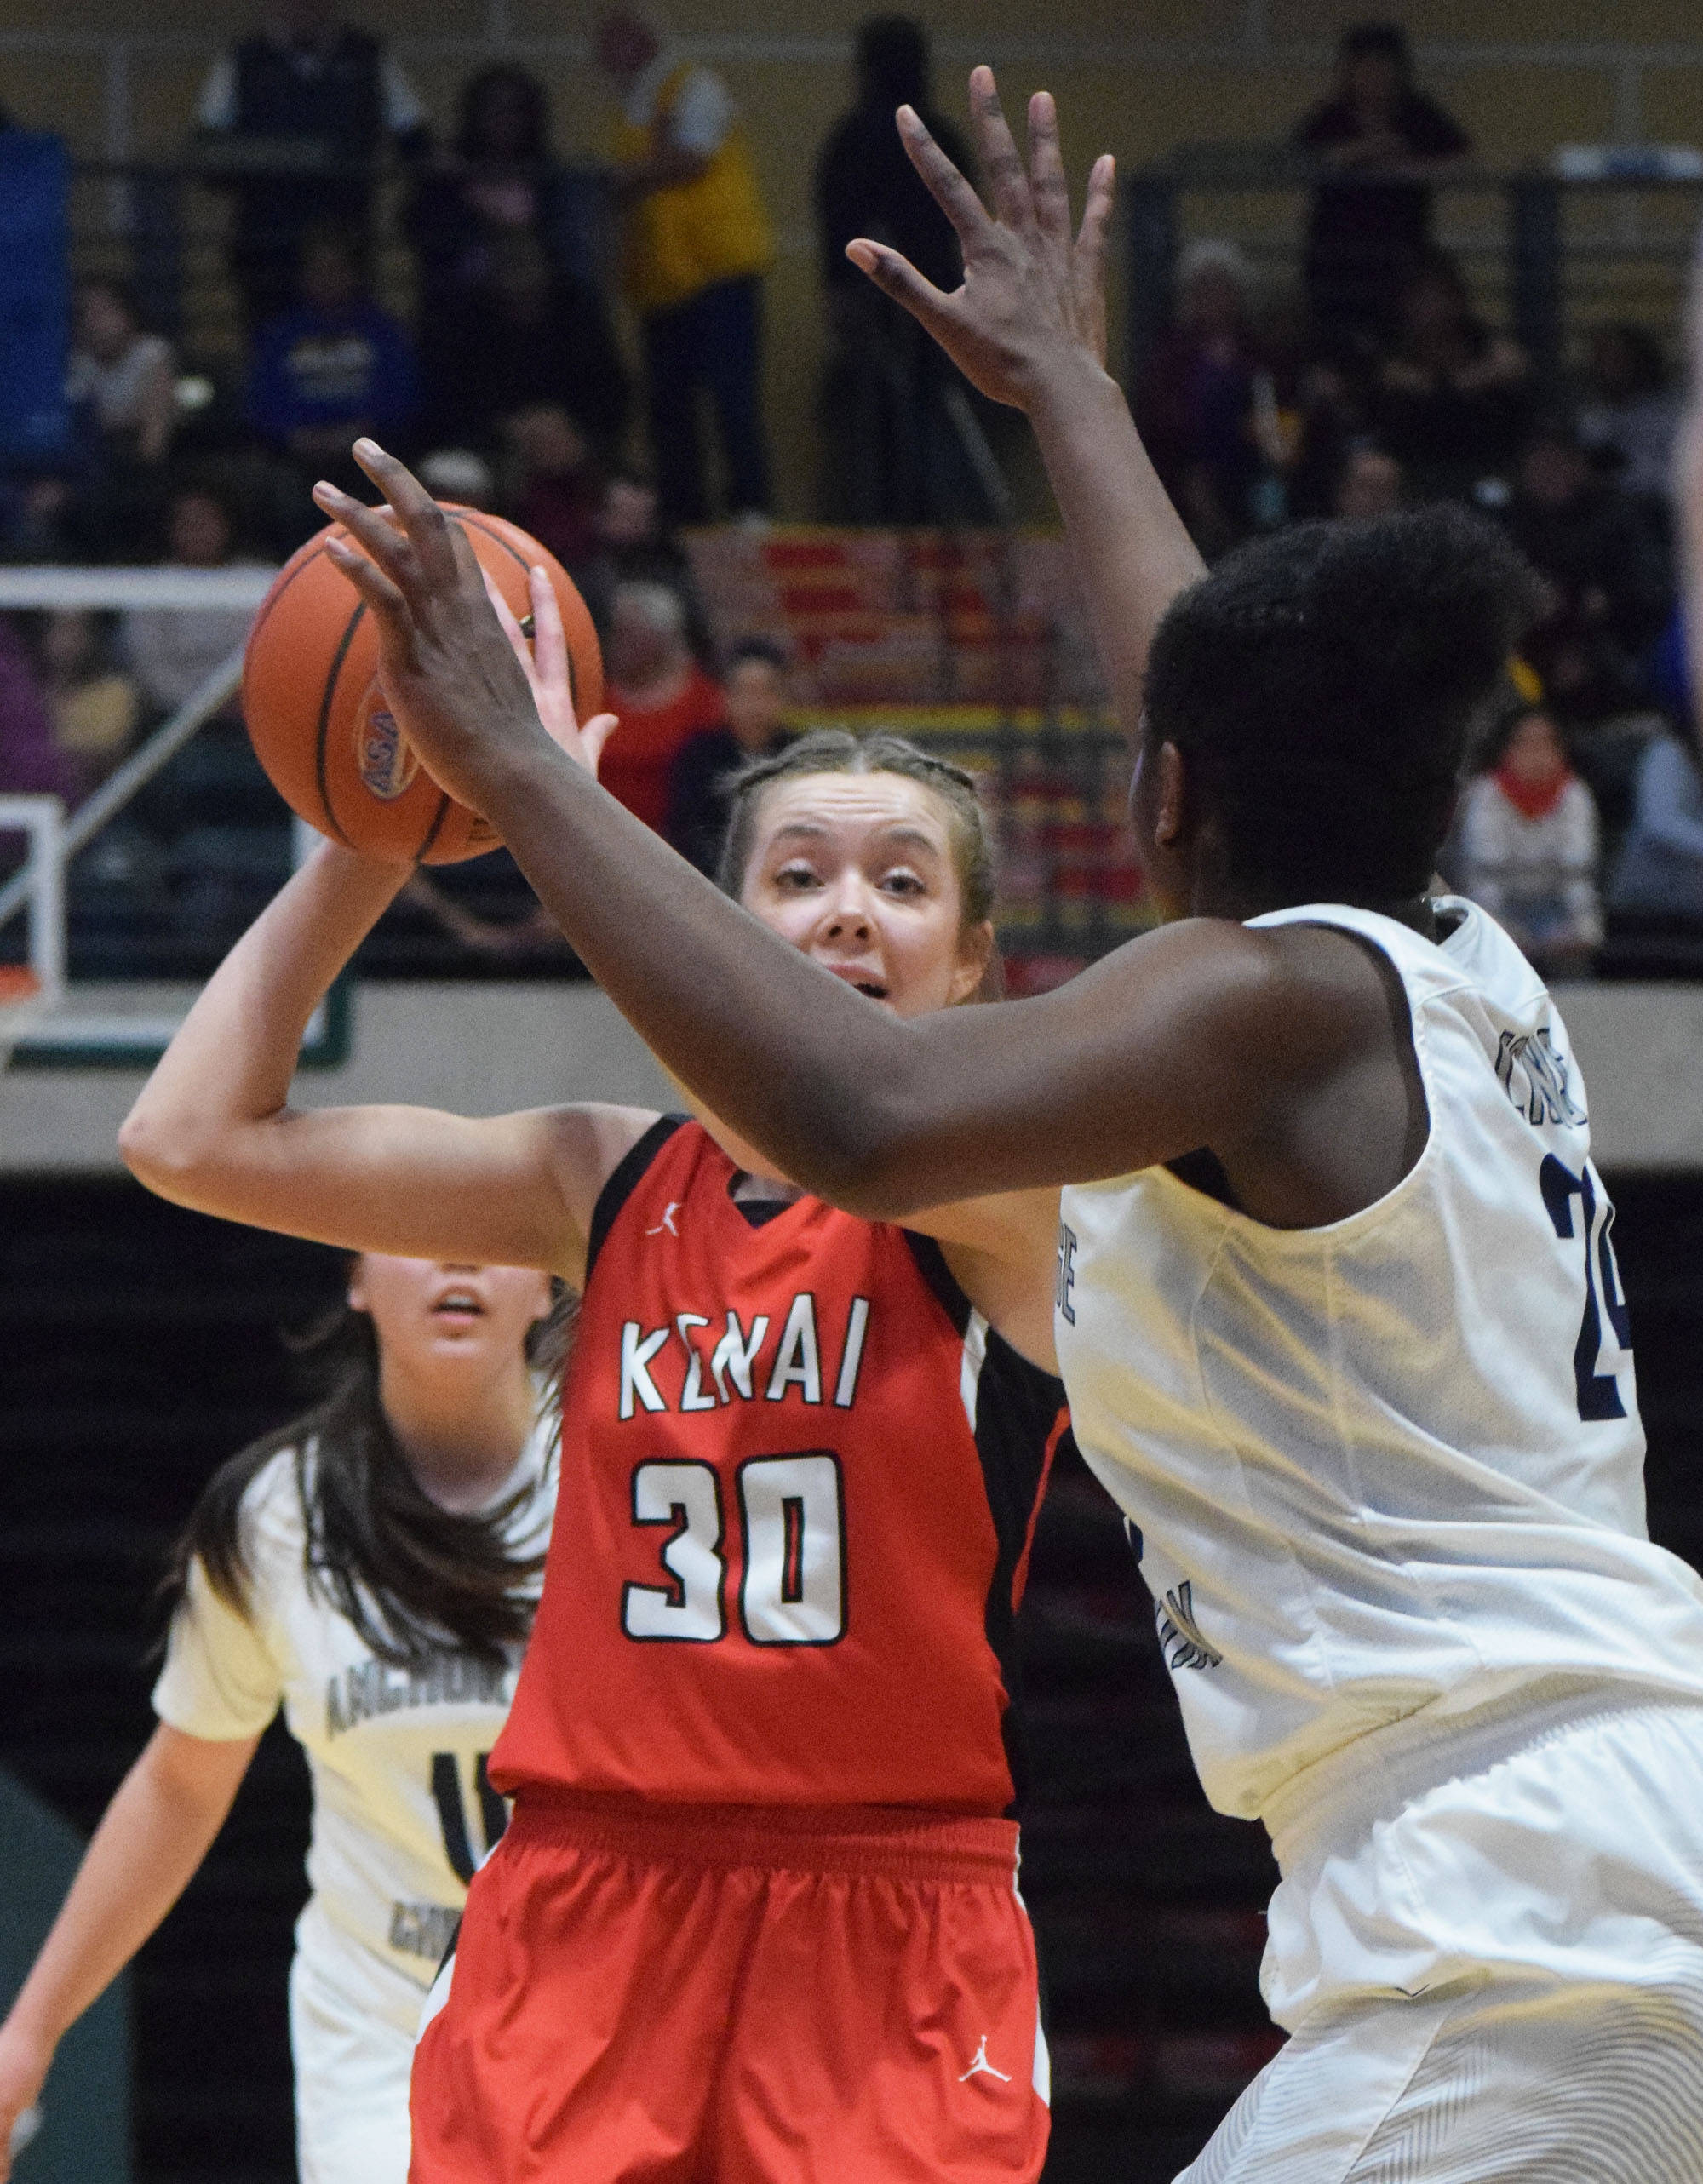 Kenai’s Brooke Satathite (30) looks for an open teammate with ACS defender Jordan Todd in her face Friday, March 22, 2019, at the Class 3A girls state tournament at the Alaska Airlines Center in Anchorage. (Photo by Joey Klecka/Peninsula Clarion)